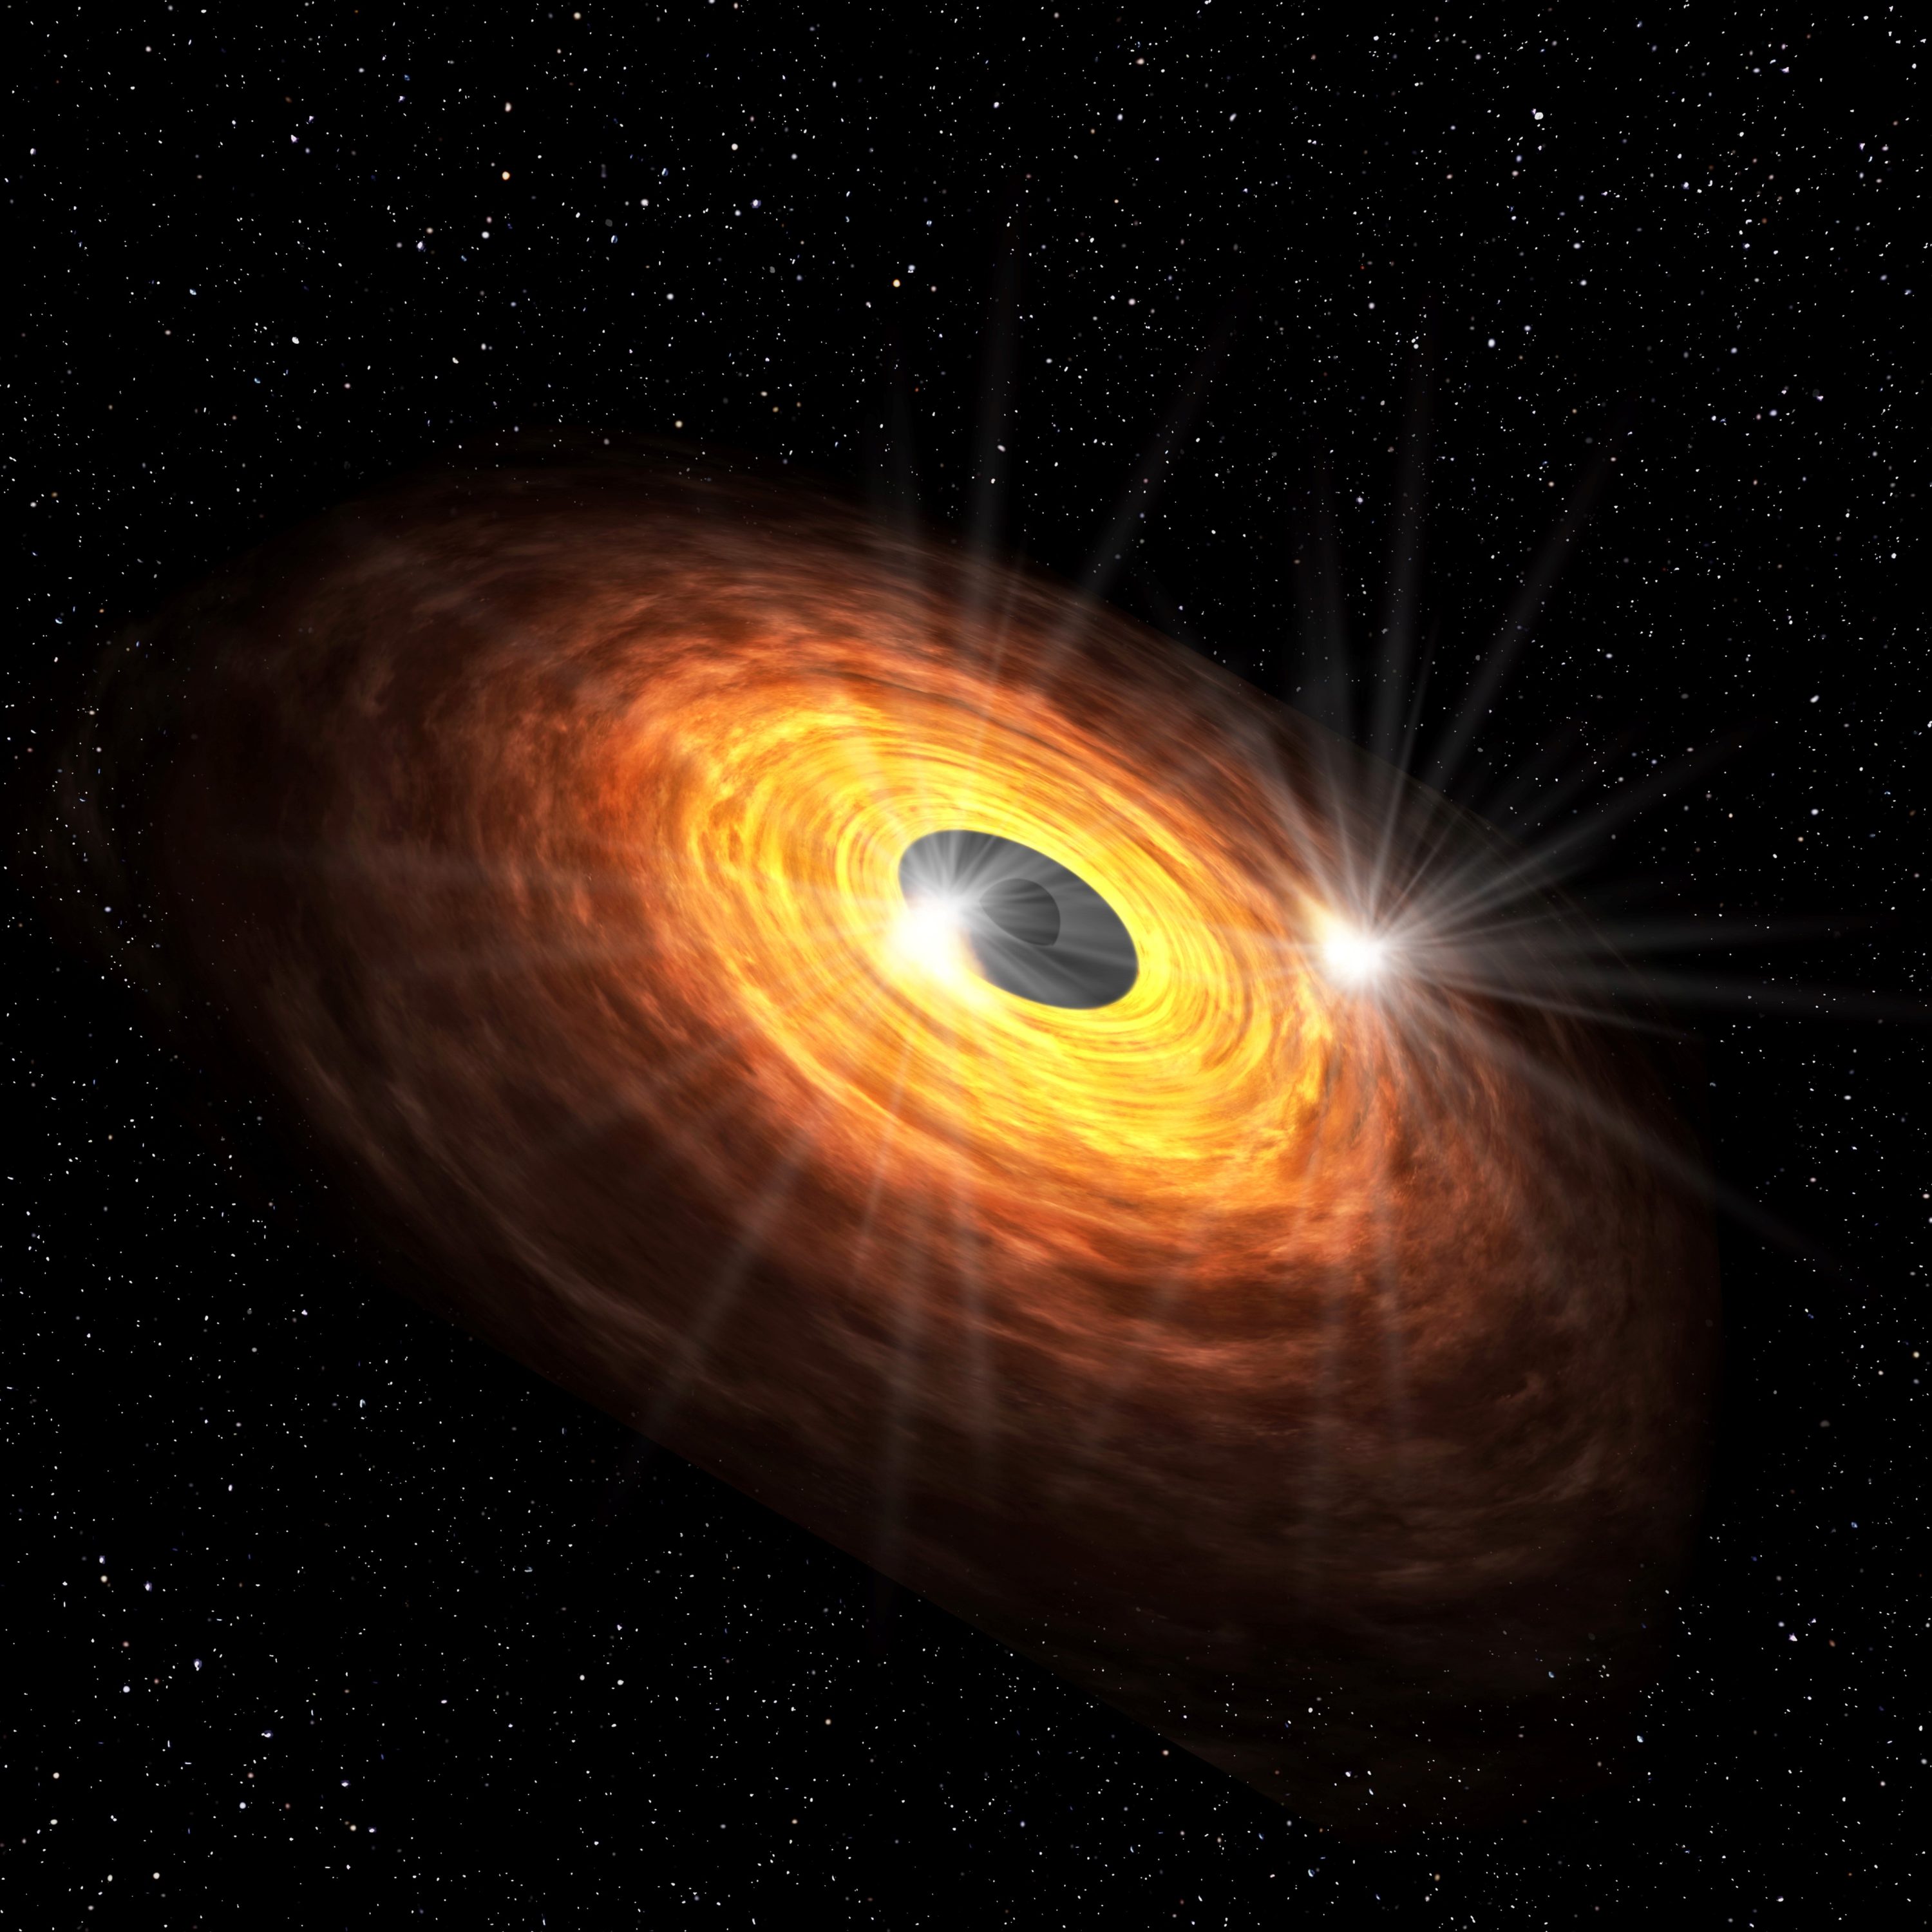 Artist’s impression of the gaseous disk around the supermassive black hole. Hot spots circling around the black hole could produce the quasi-periodic millimeter emission detected with ALMA. Credit: Keio University